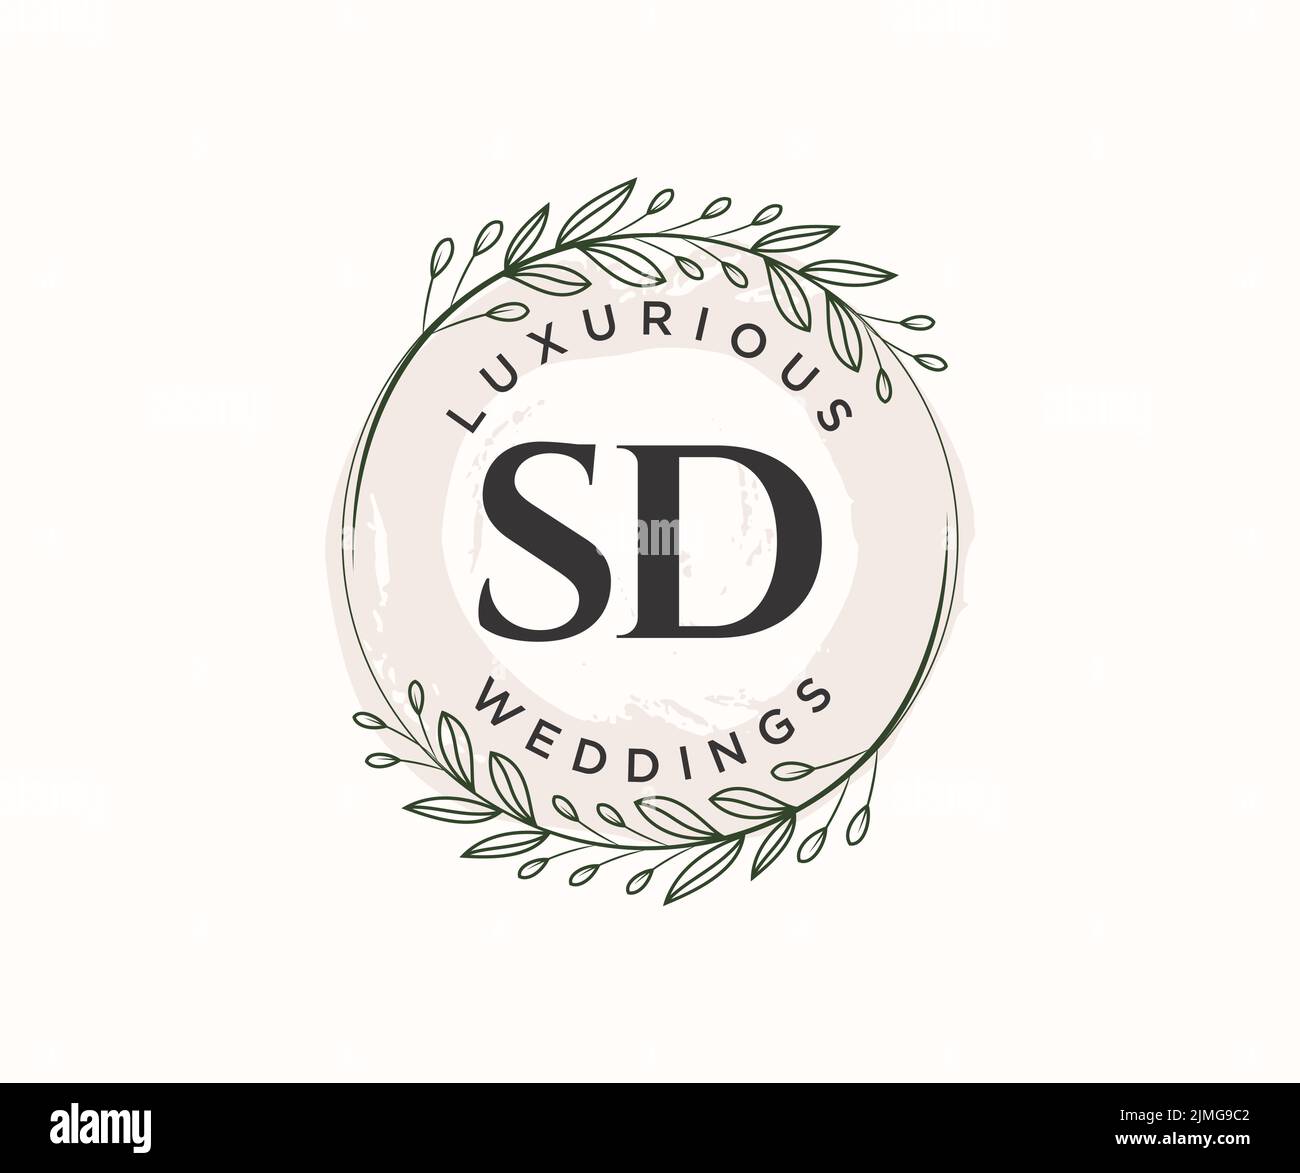 SD Initials letter Wedding monogram logos template, hand drawn modern minimalistic and floral templates for Invitation cards, Save the Date, elegant Stock Vector